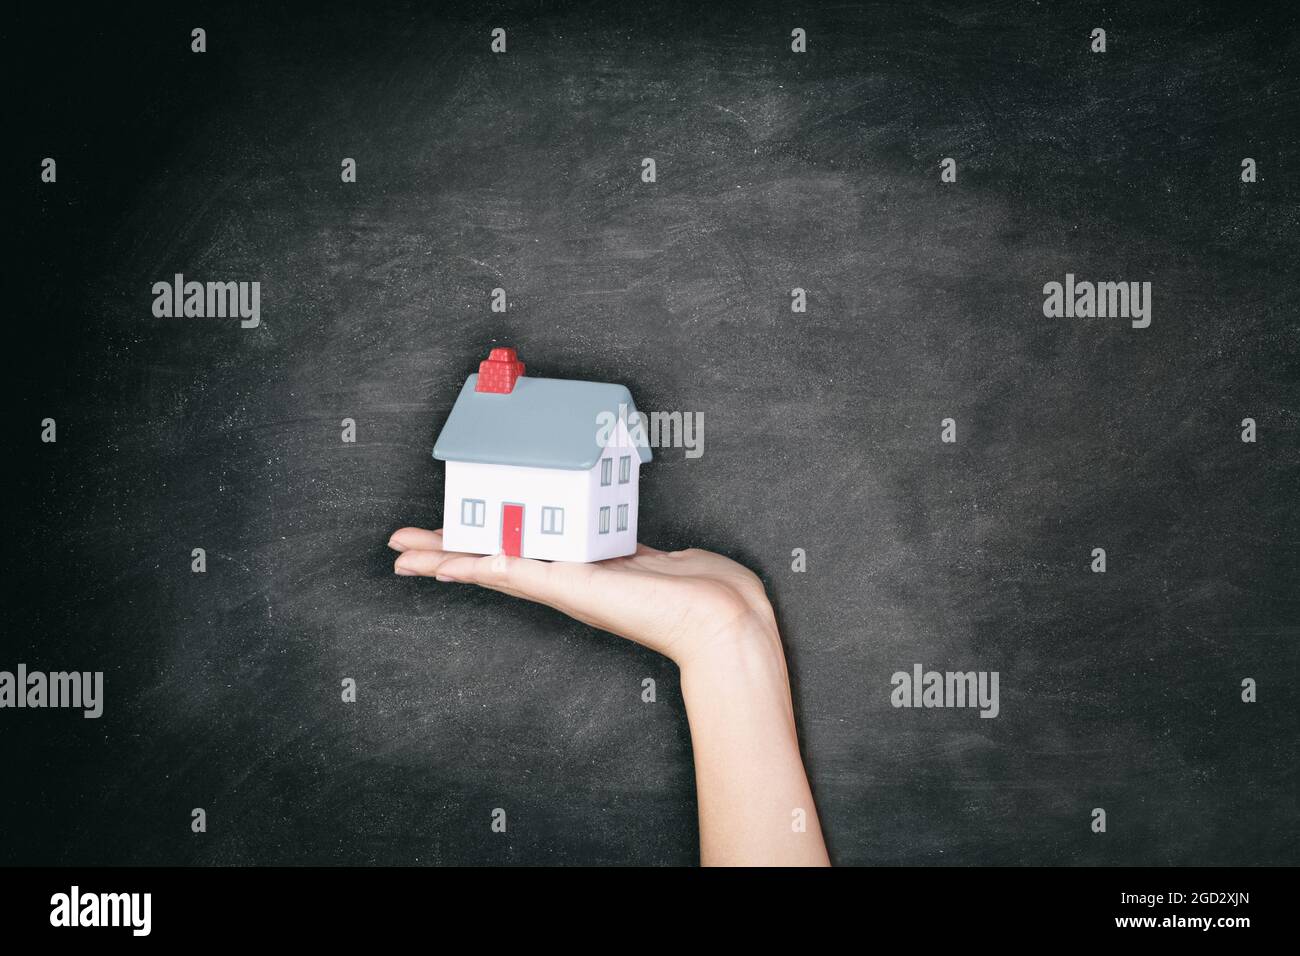 Real Estate blackboard background - New home ownership woman showing miniature house toy for homeowner concept billboard. Stock Photo